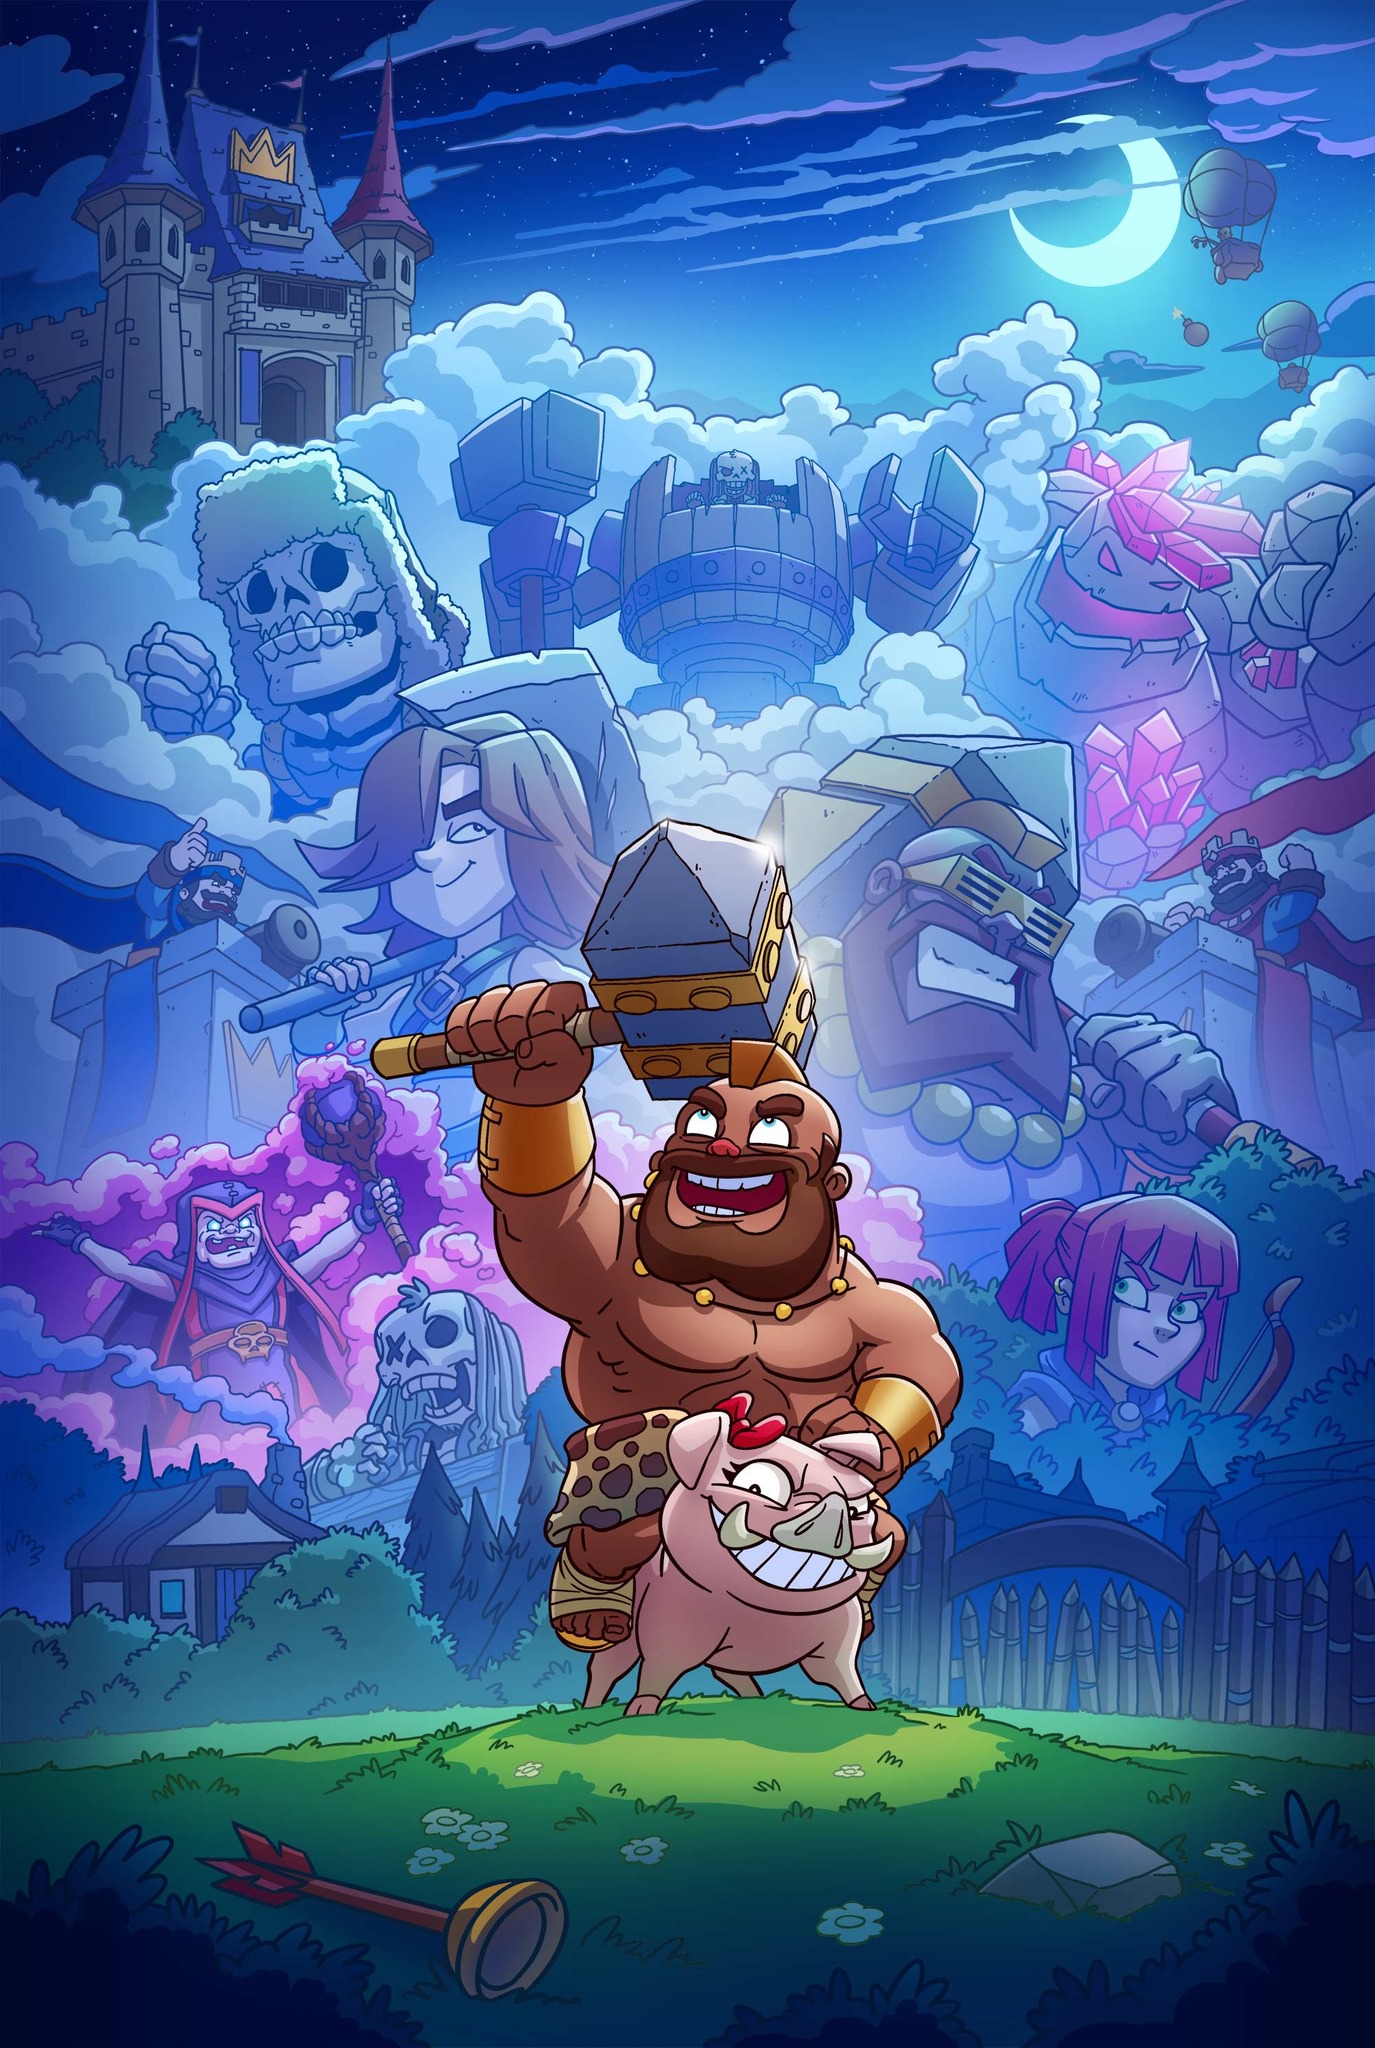 100+] Clash Royale Wallpapers